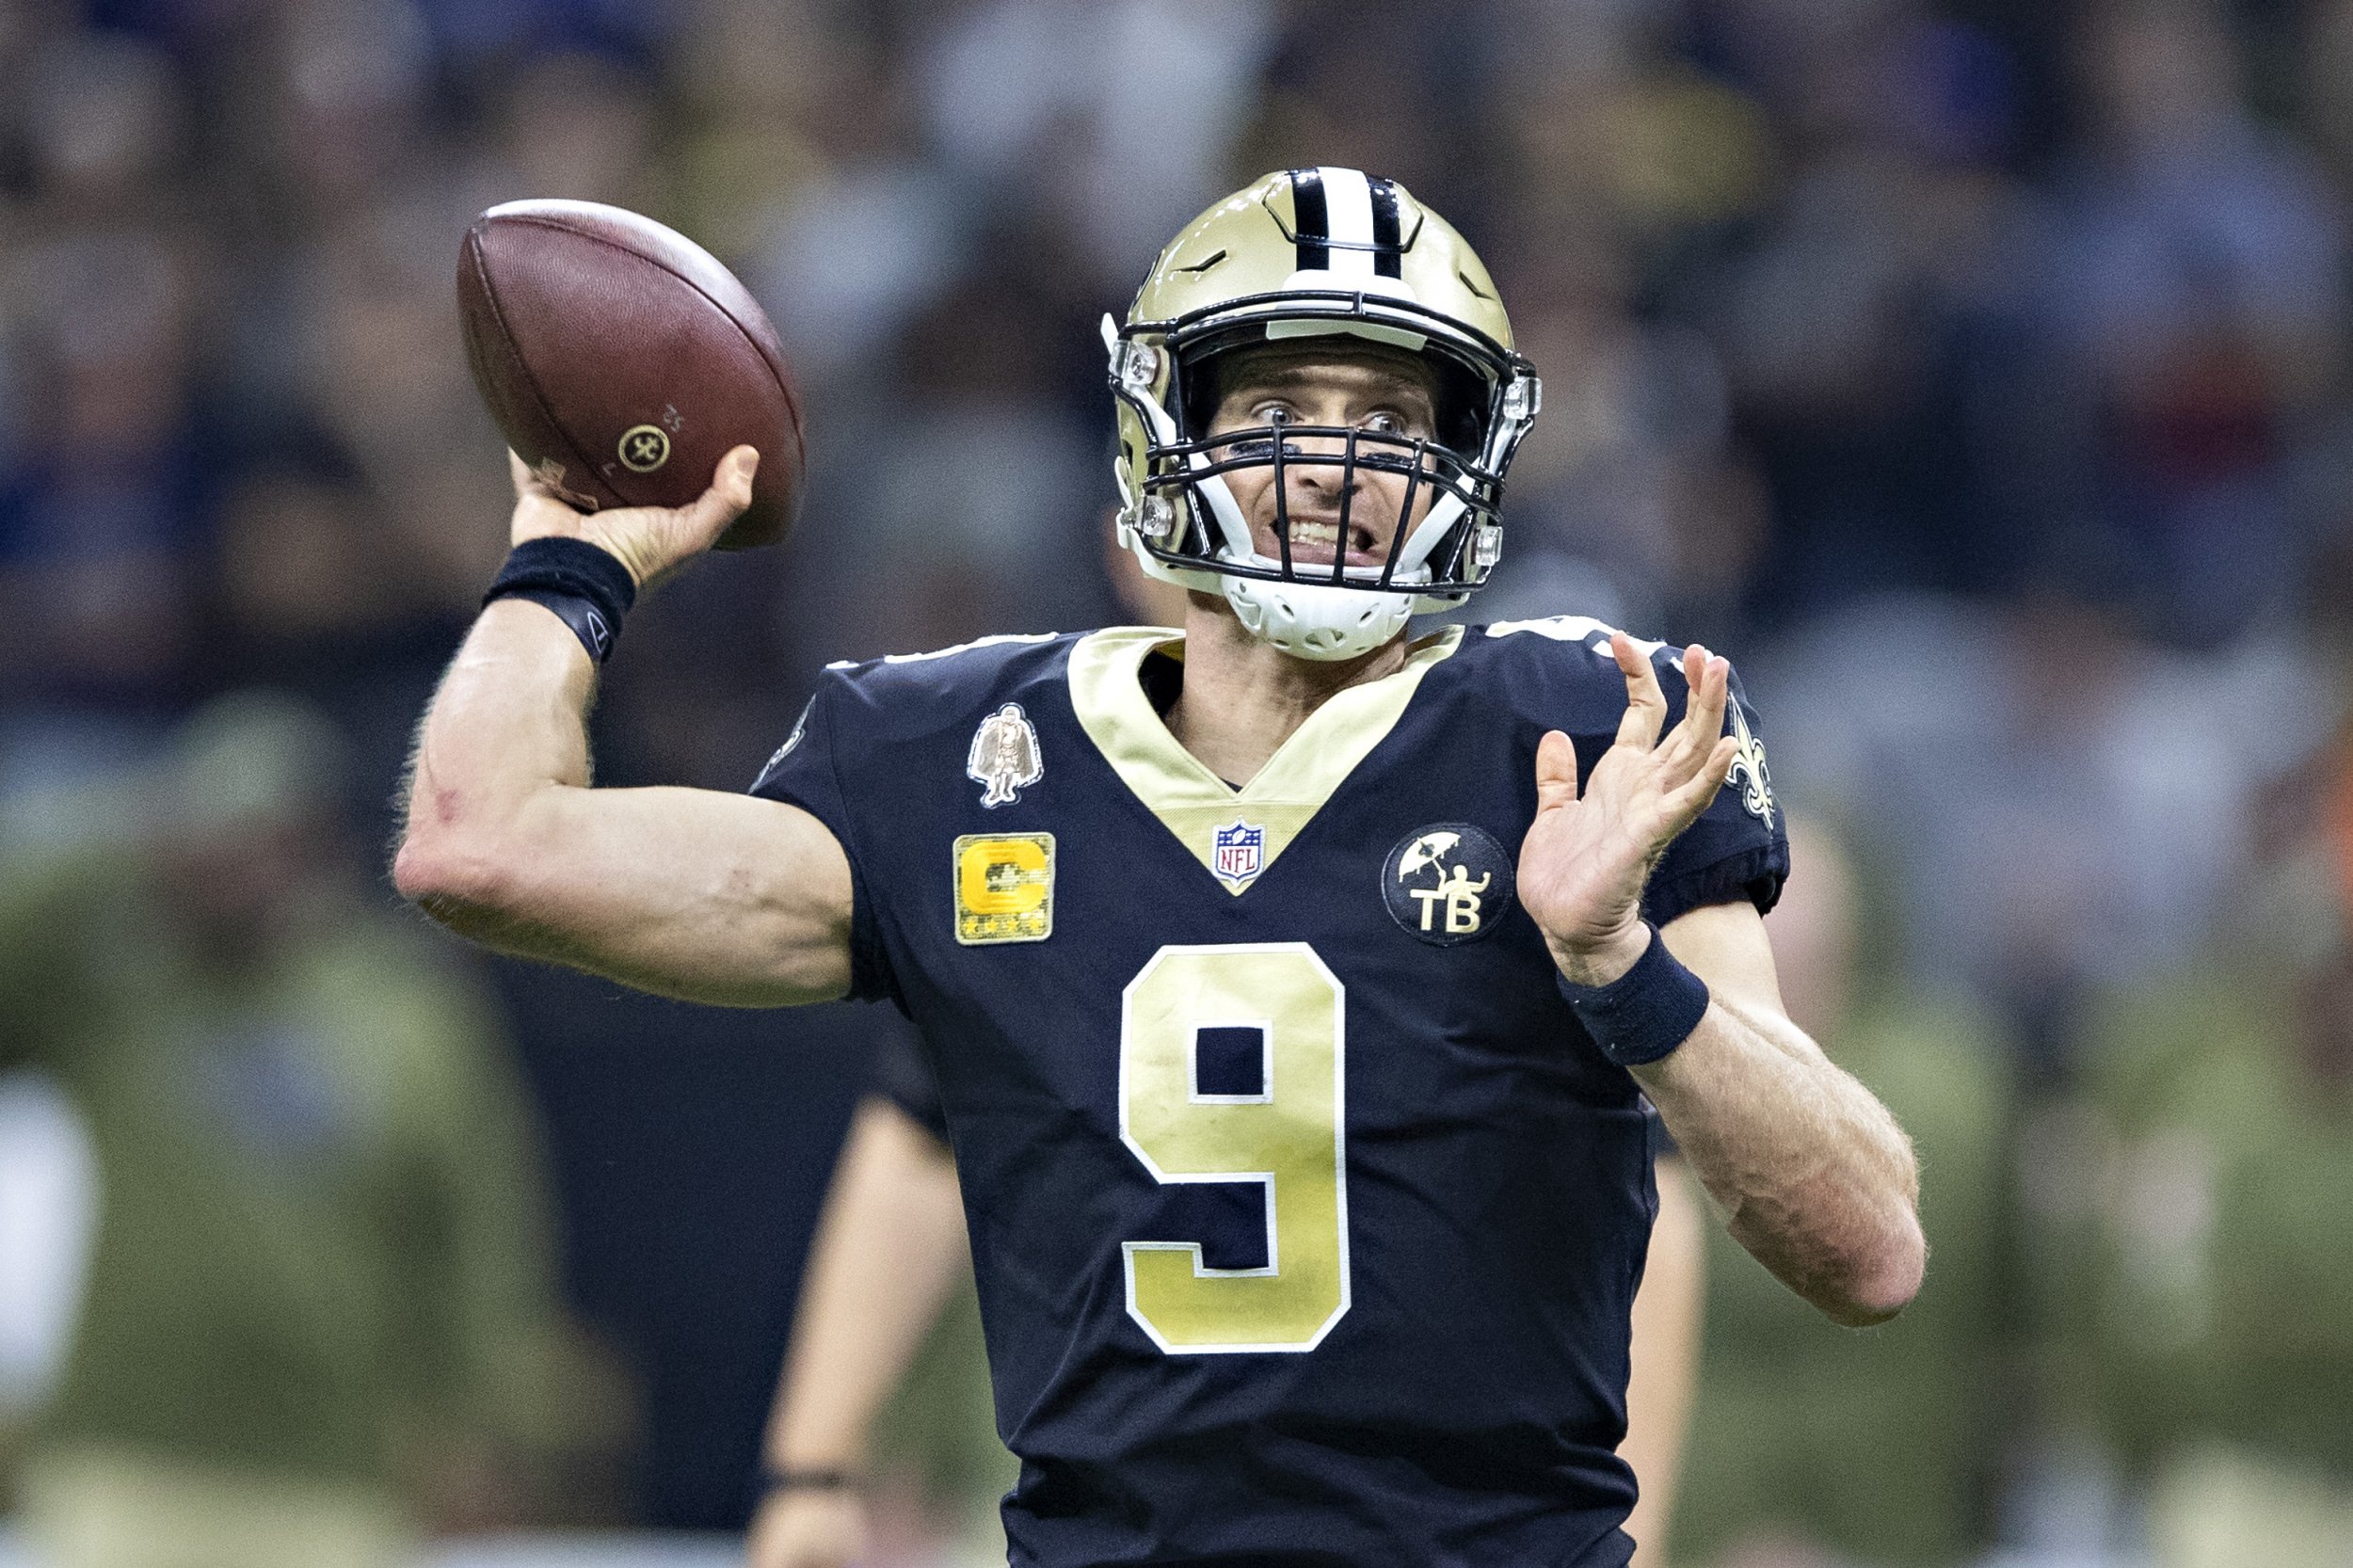 NFL Playoffs 2019: Super Bowl Odds For Saints, Chiefs, Eagles, and